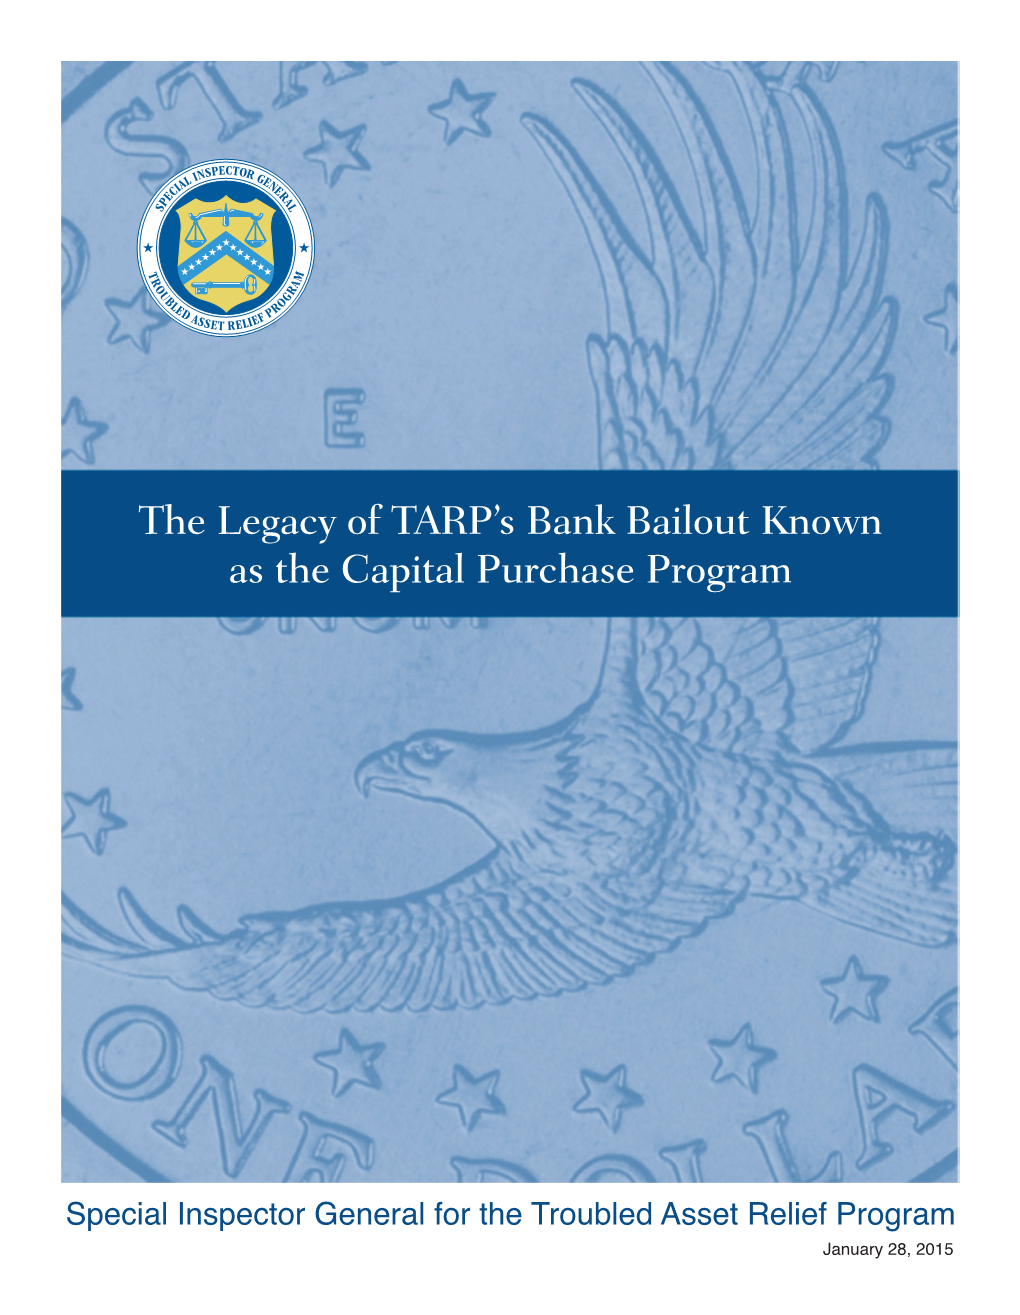 The Legacy of TARP's Bank Bailout Known As the Capital Purchase Program